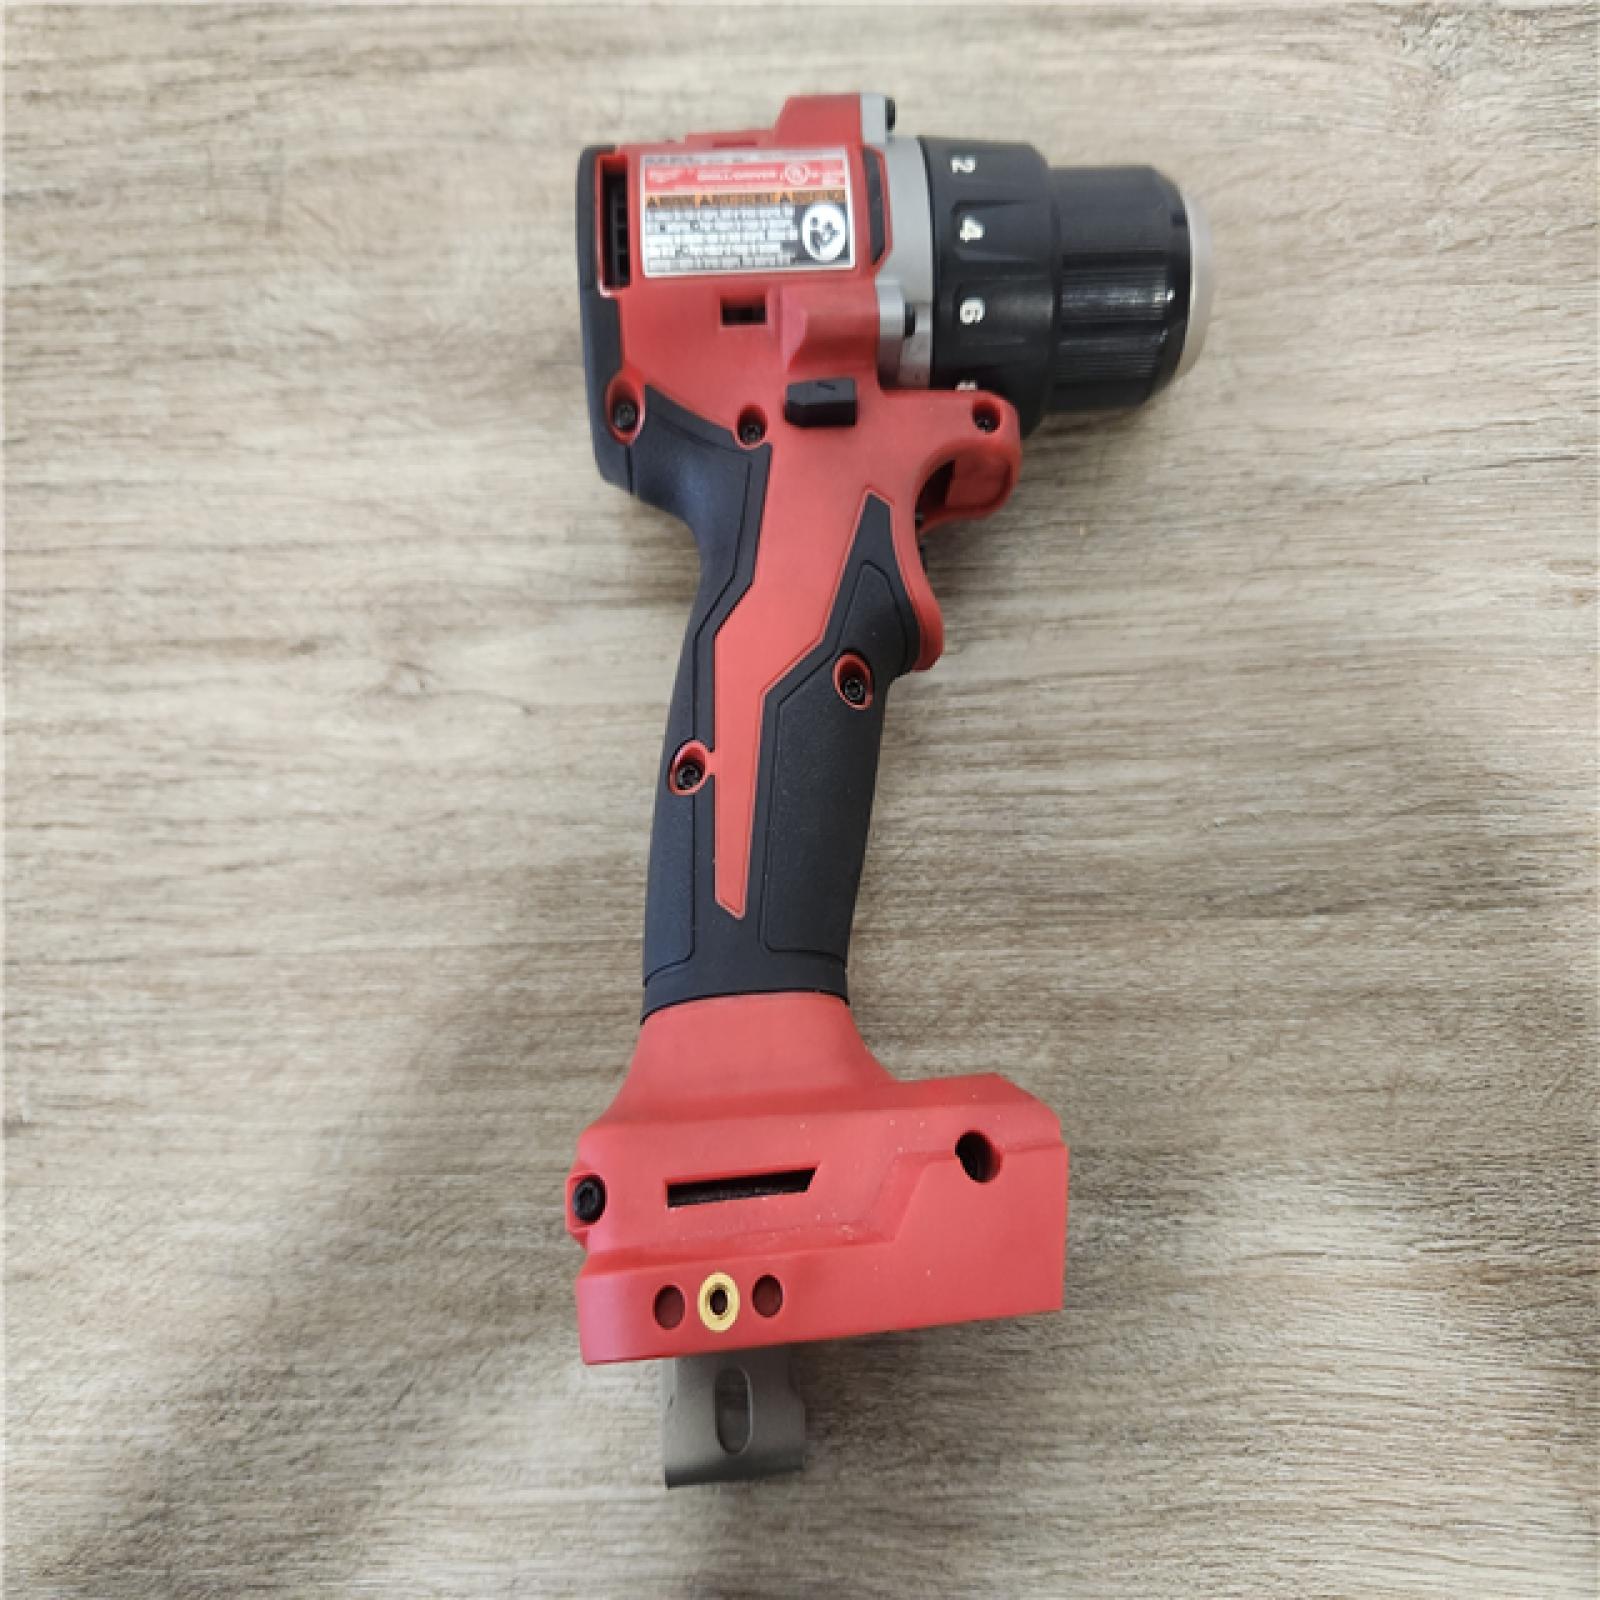 Phoenix Location NEW Milwaukee M18 18V Lithium-Ion Brushless Cordless 1/2 in. Compact Drill/Driver with M18 5.0Ah Battery and Charger